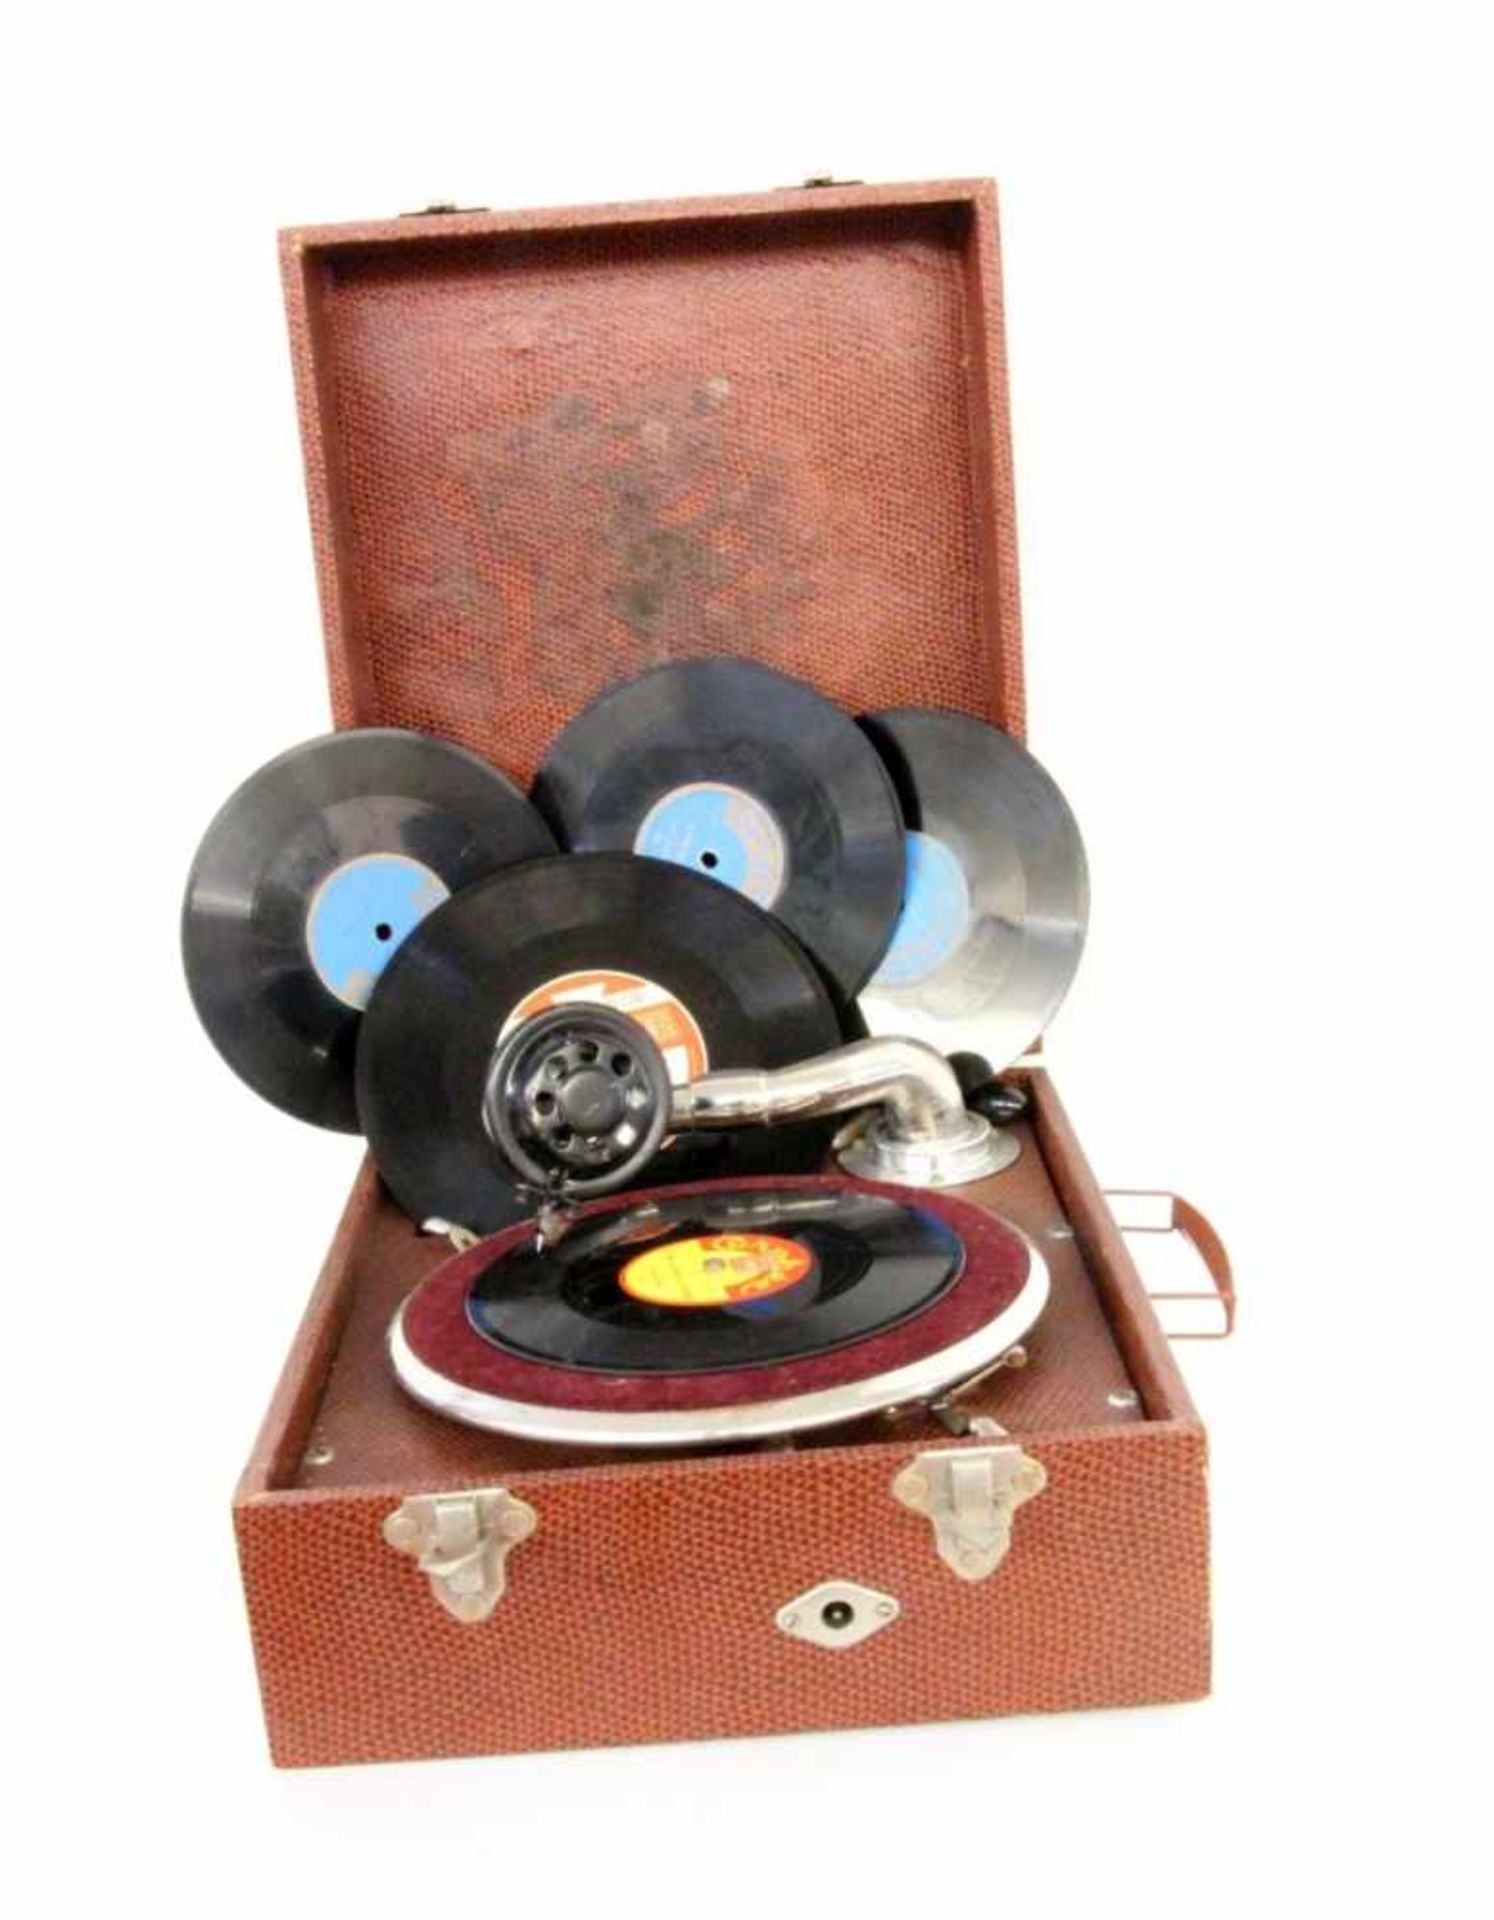 AN ORPHÉE TRAVEL GRAMMOPHONE 1920s In a box, with 6 records. Condition: intact.ORPHÉE